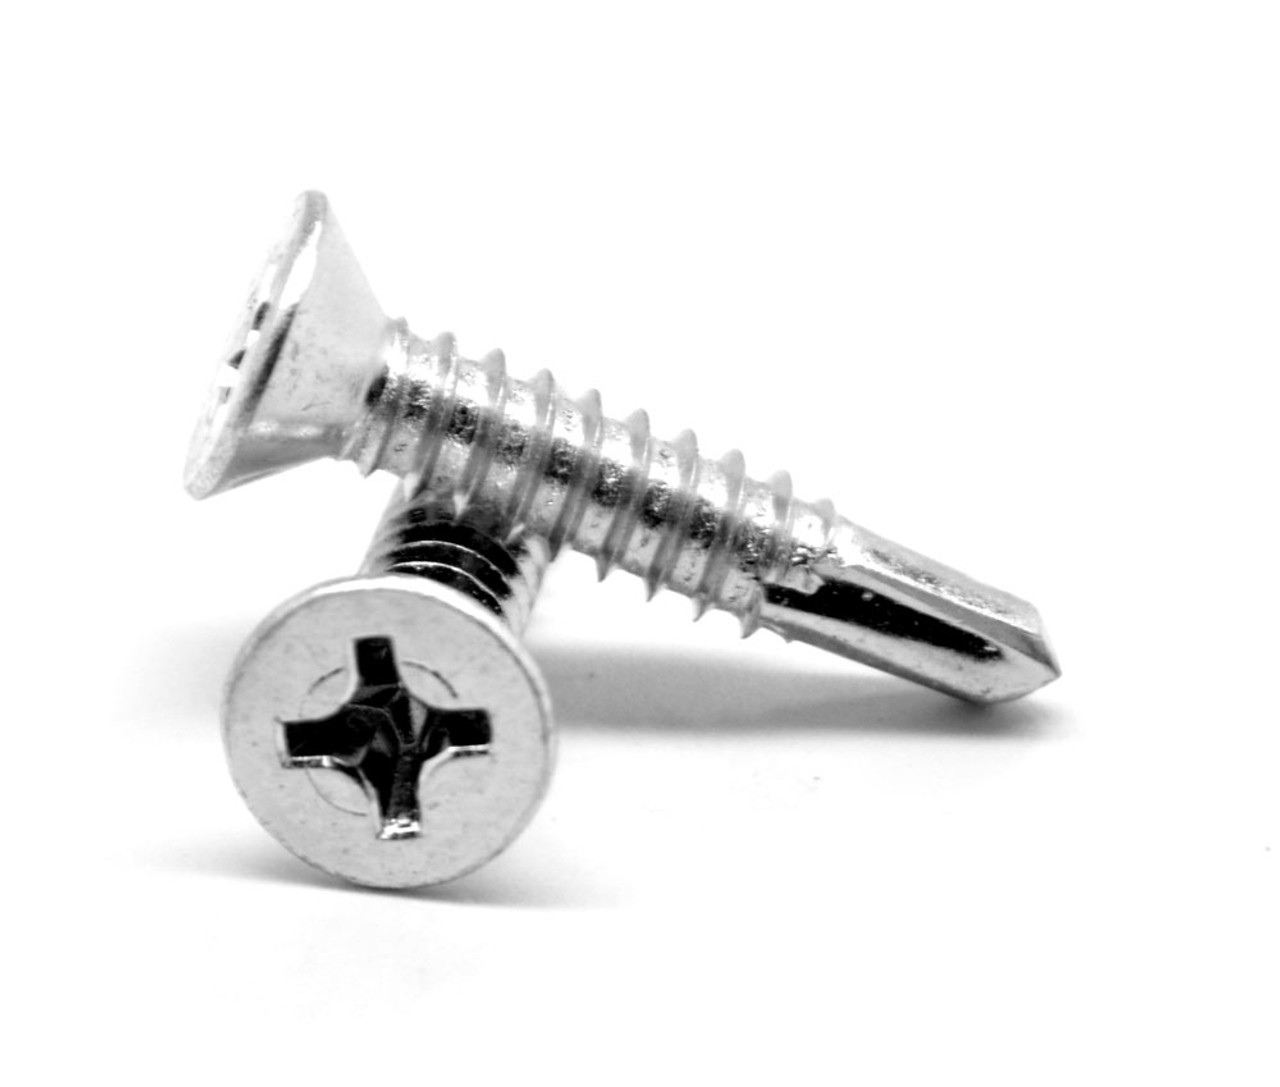 #6-20 x 5/8" (FT) Self Drilling Screws Phillips Flat Head #2 Point Stainless Steel 410